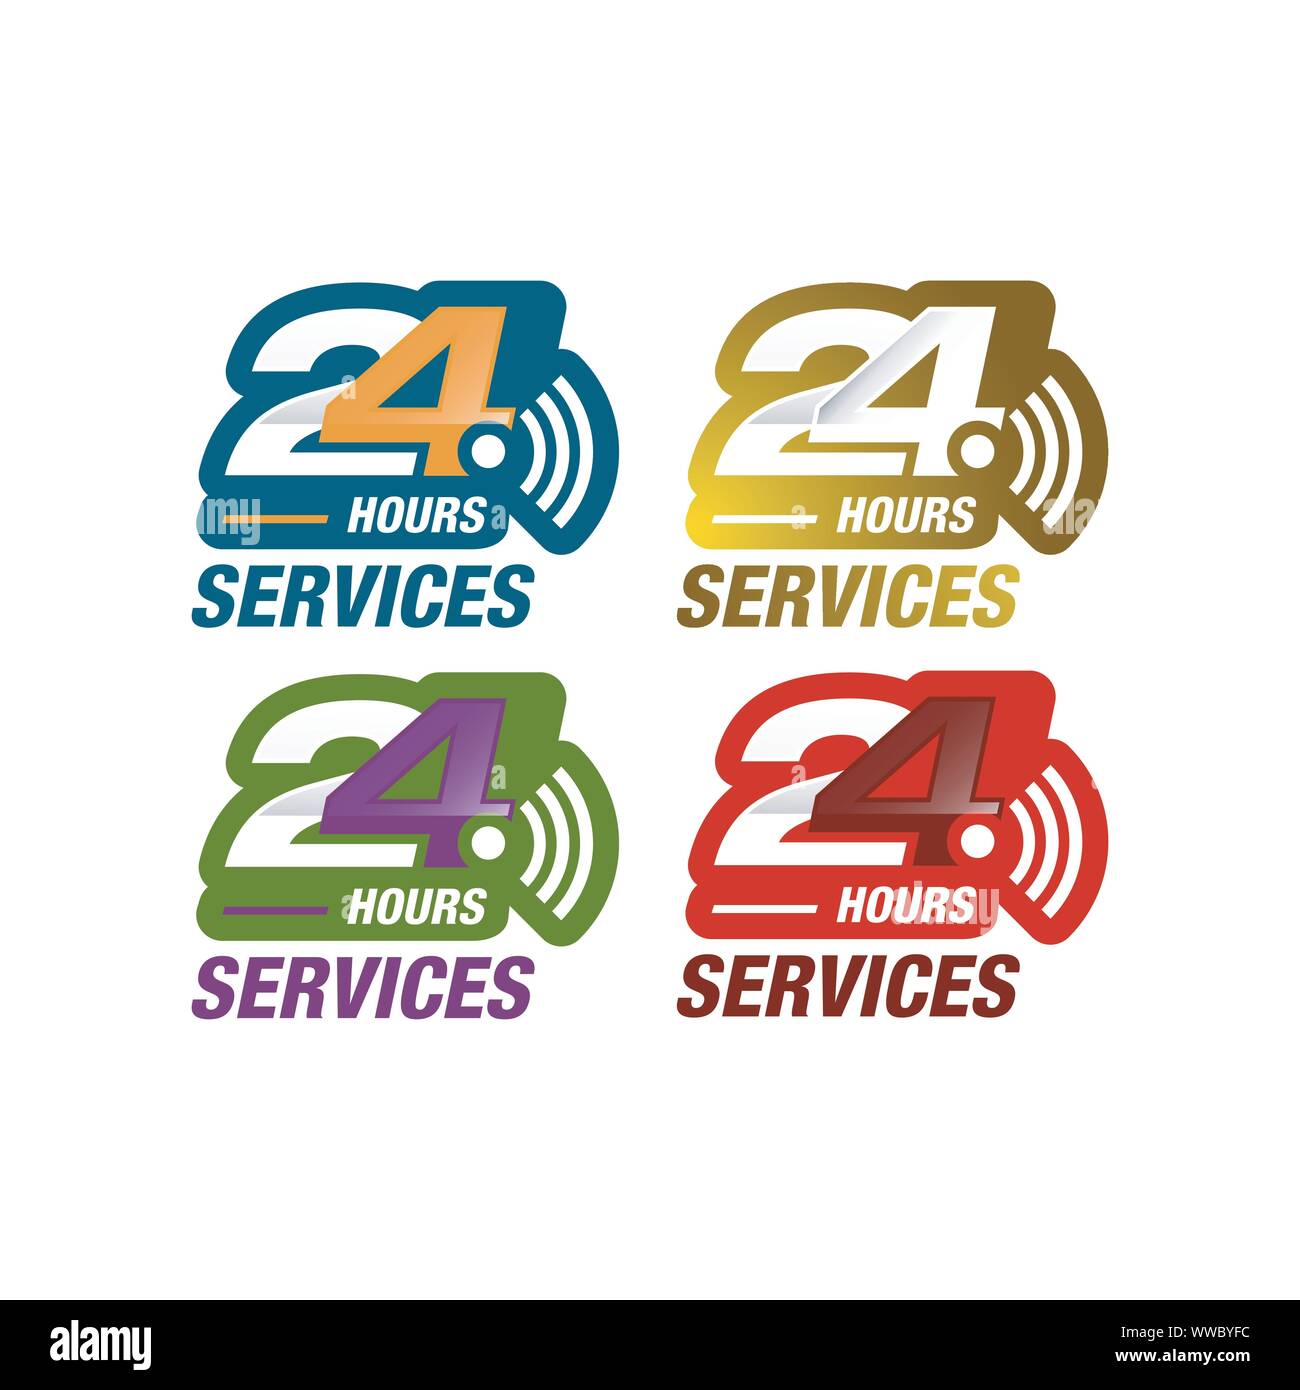 24 hours service sign vector icon day night services button symbol Stock Vector